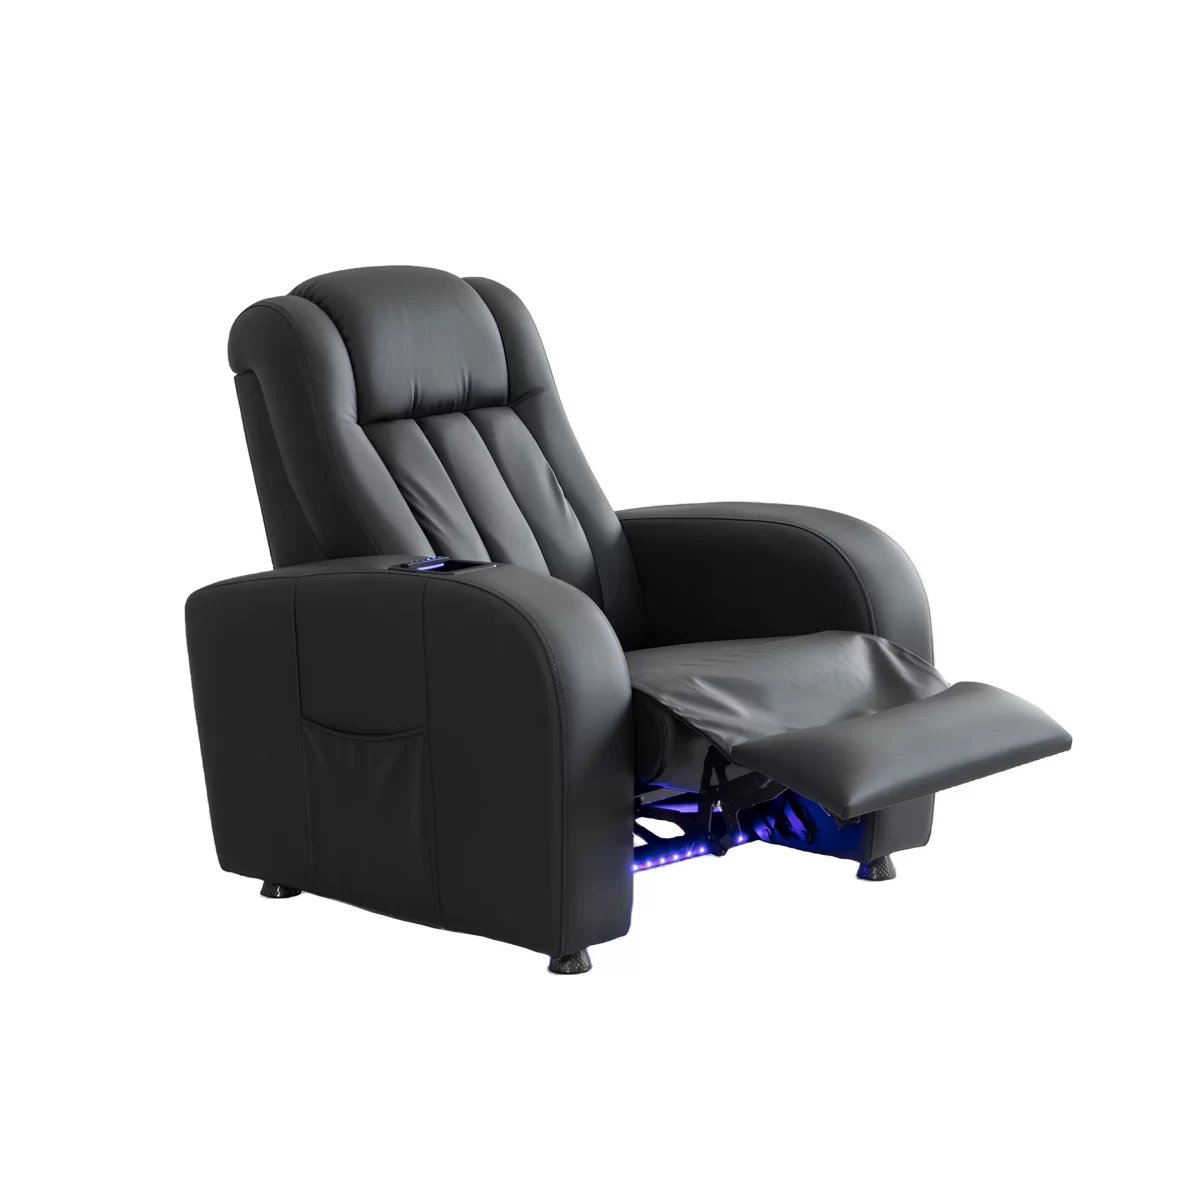 siesta reclining sofa vip theater seating led lights usb port cooler cup holder10